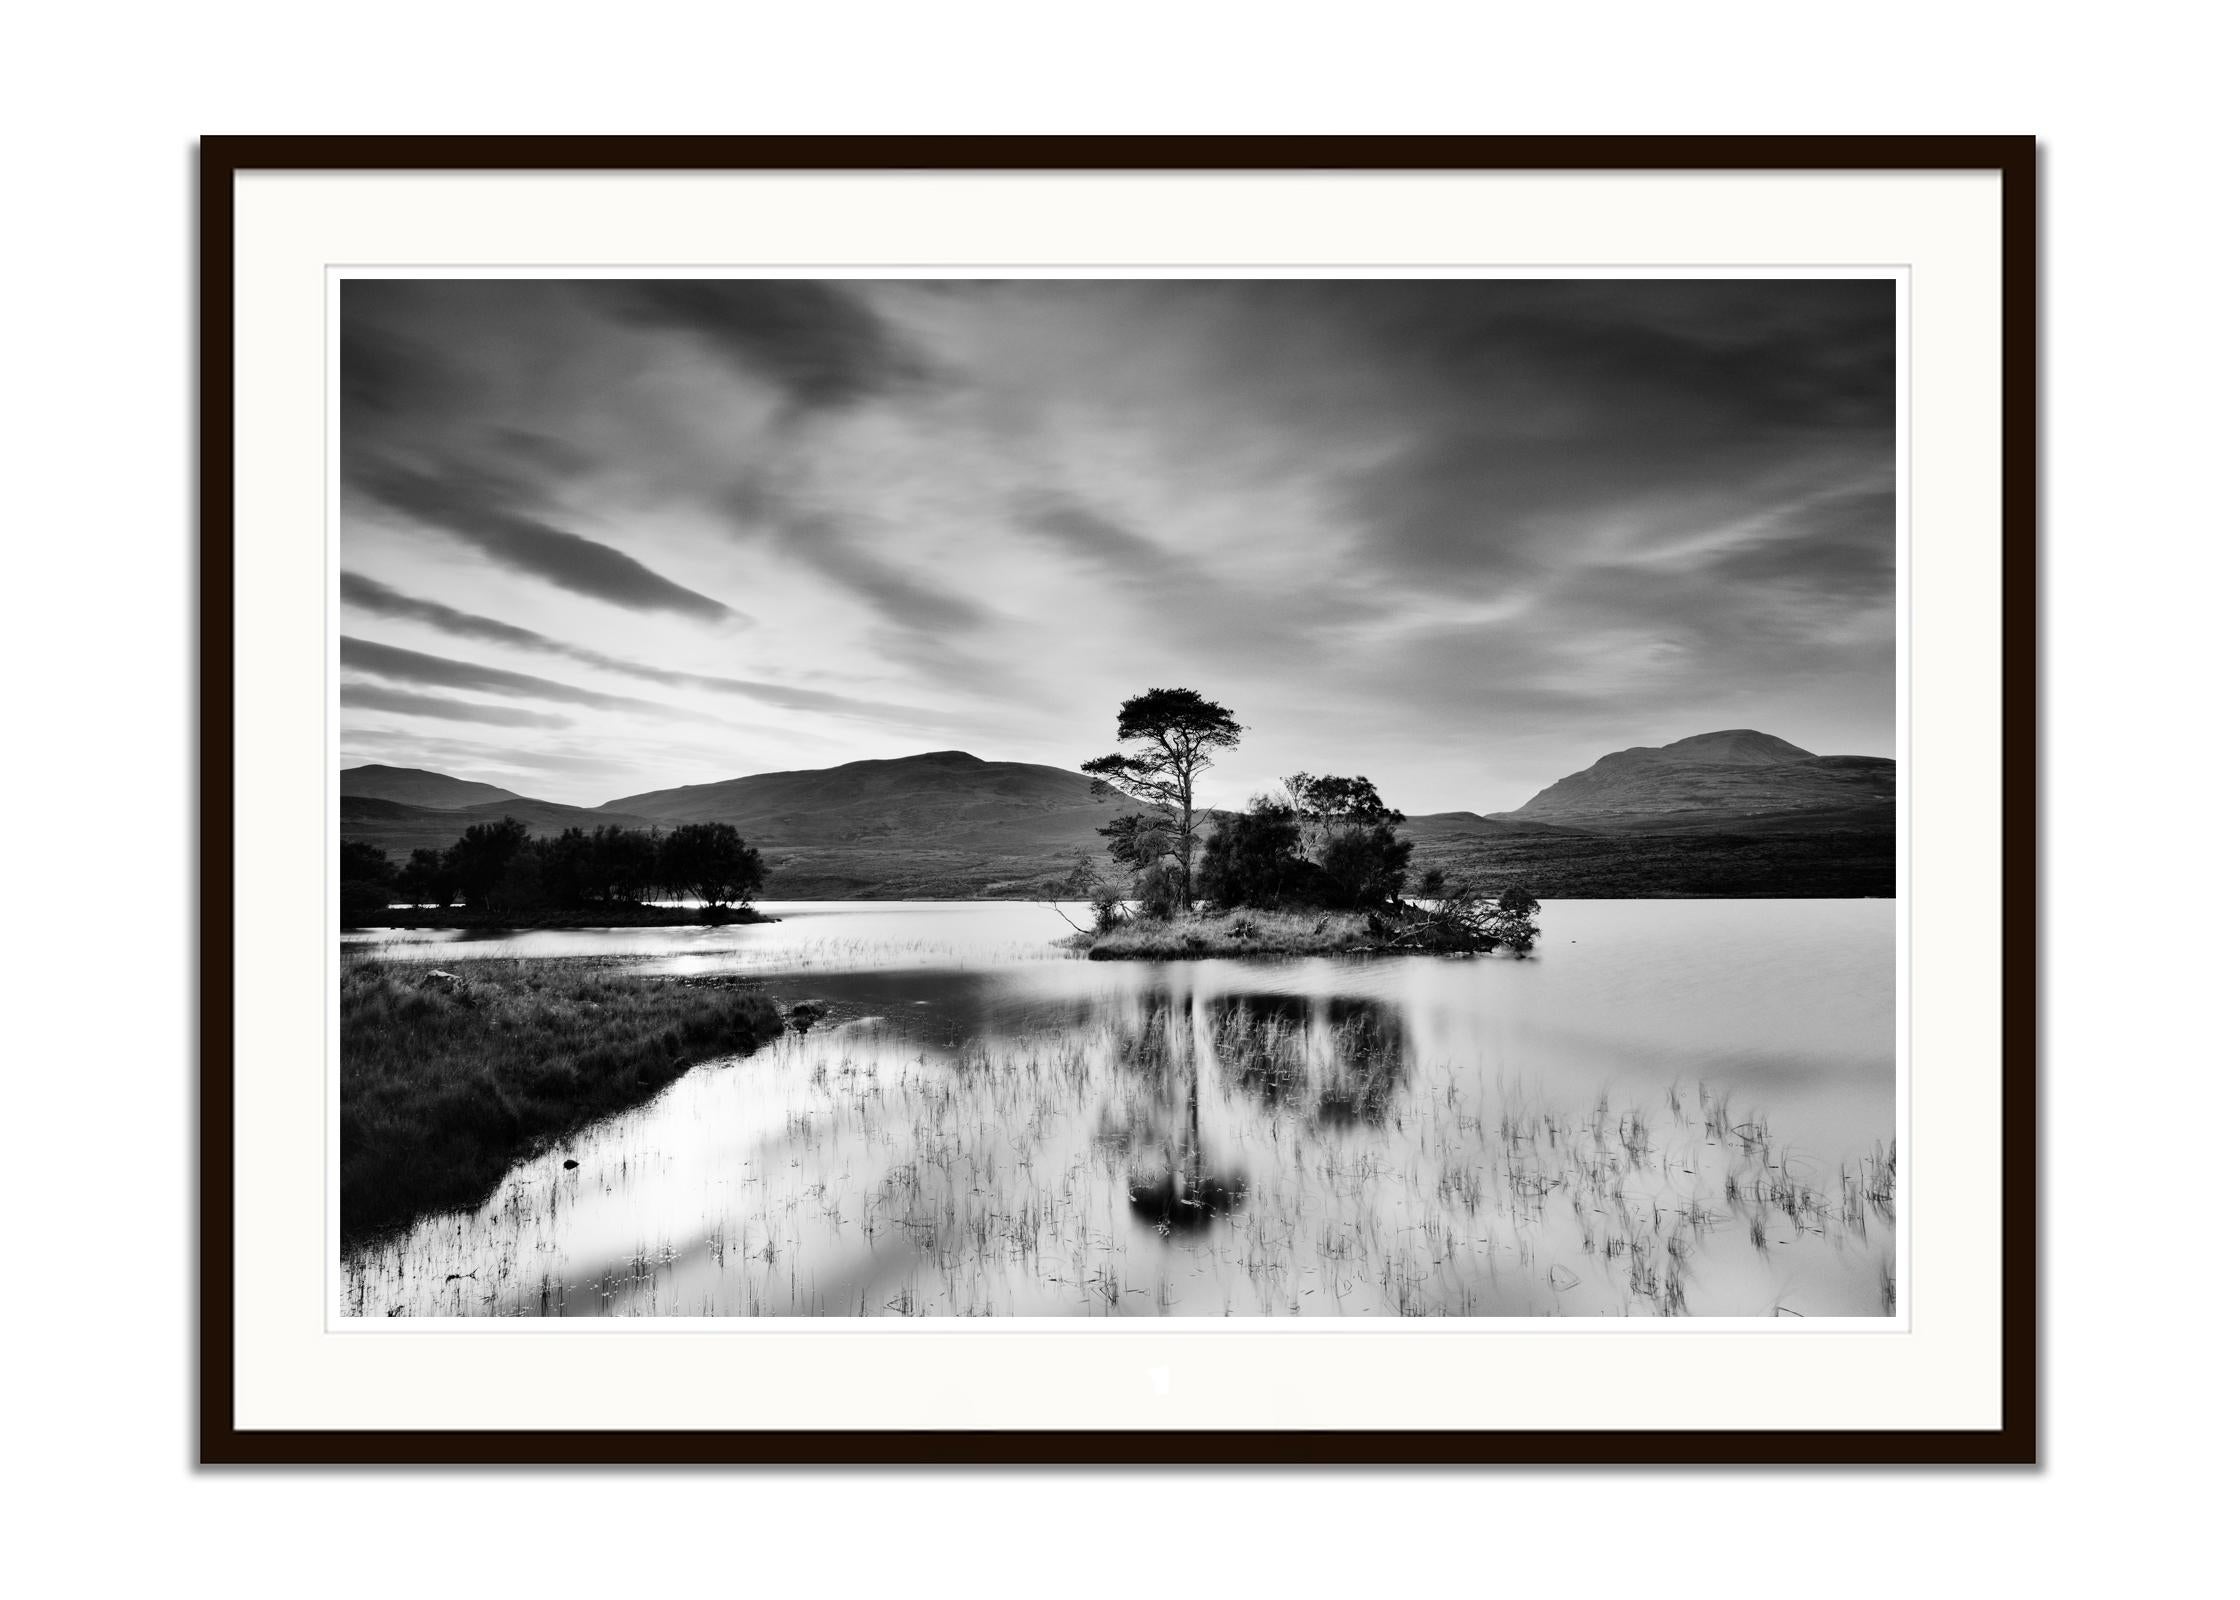 After the Sunset Tree Island Mountain Lake Scotland B&W landscape photography - Gray Landscape Photograph by Gerald Berghammer